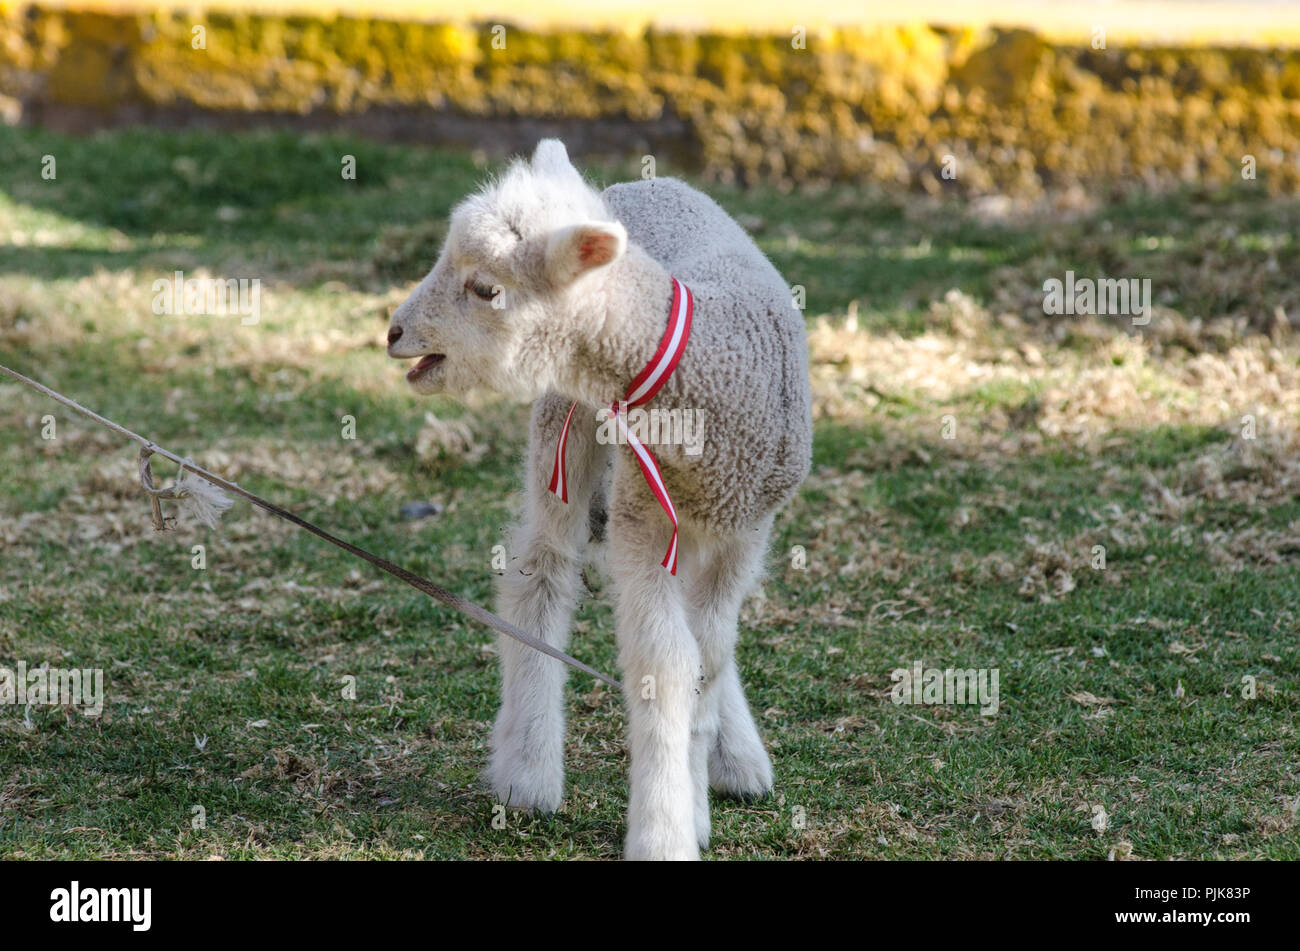 Little cute sheep romping in a meadow on a farm a sunny day Stock Photo